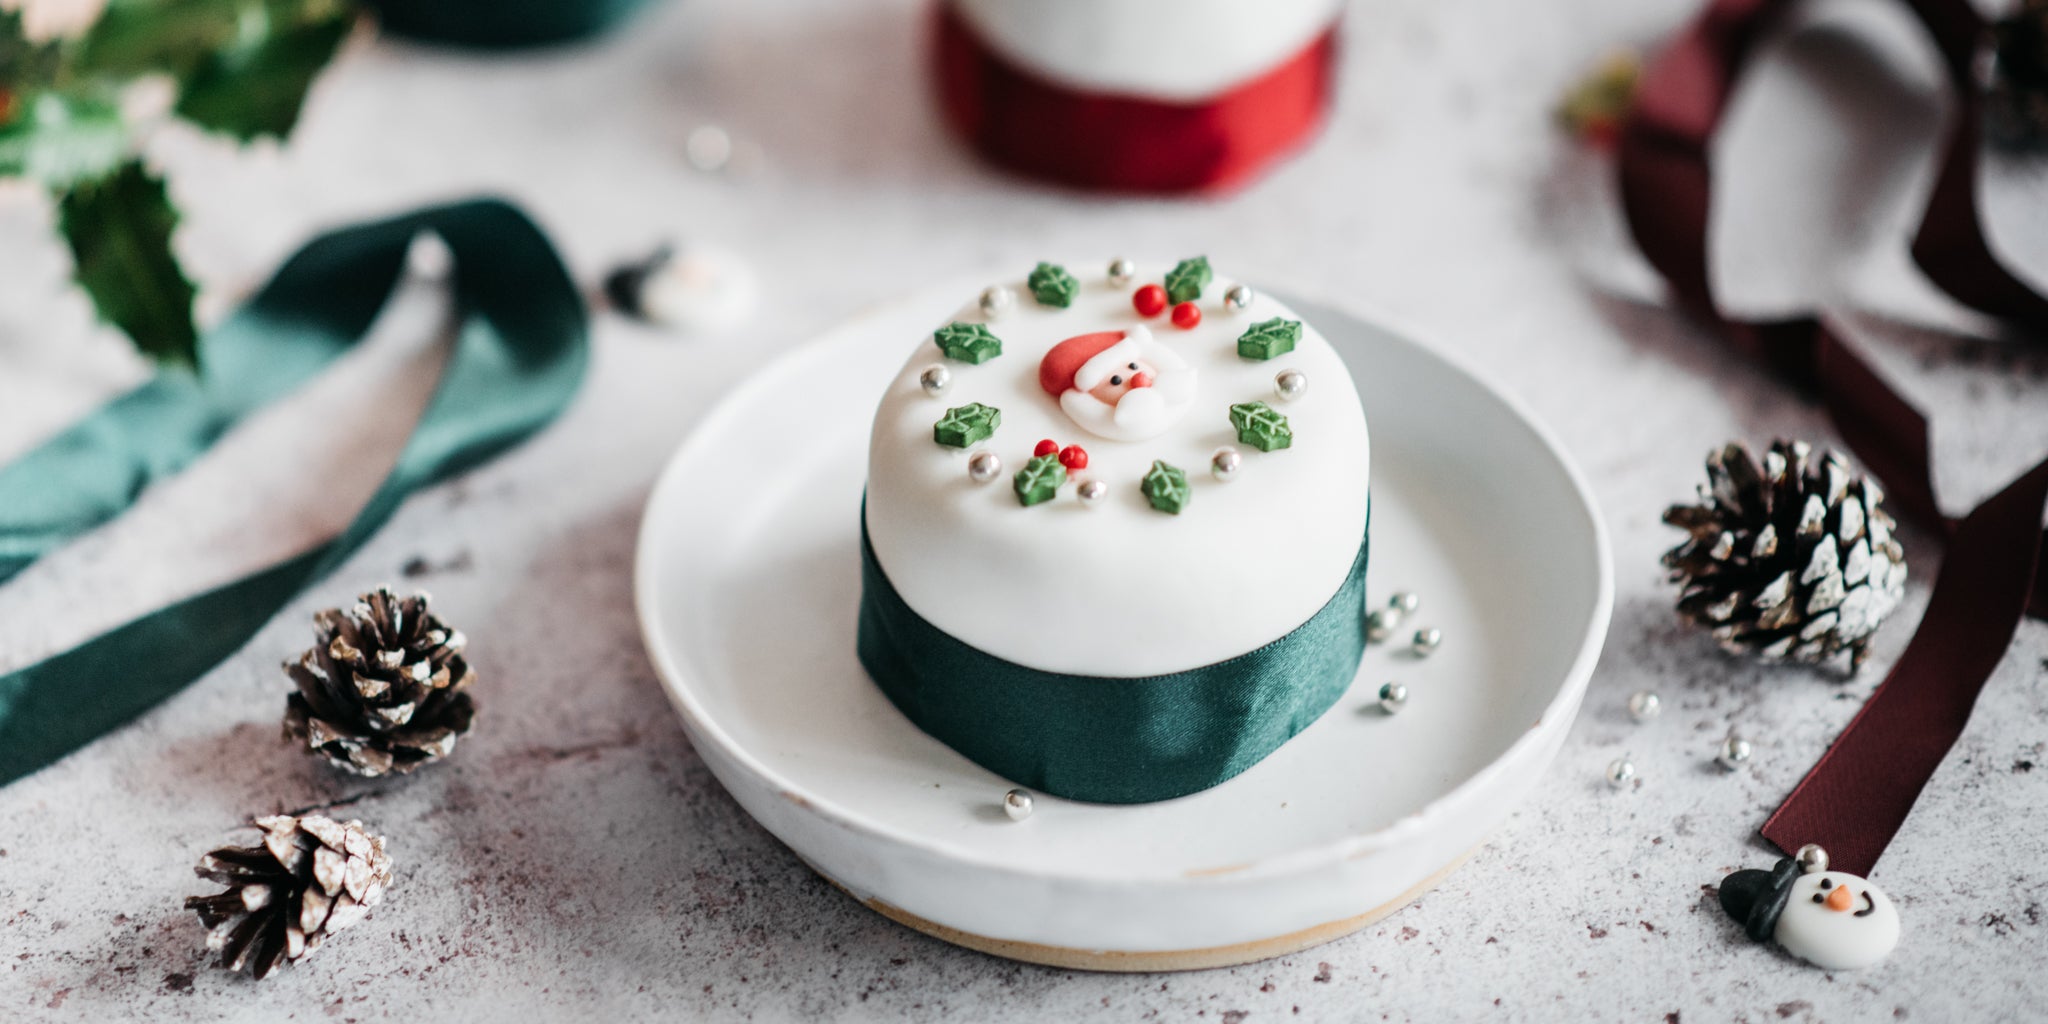 Close up of a mini christmas cake decorated with green ribbon and a santa decoration. Surrounded by ribbon, holly and pinecones